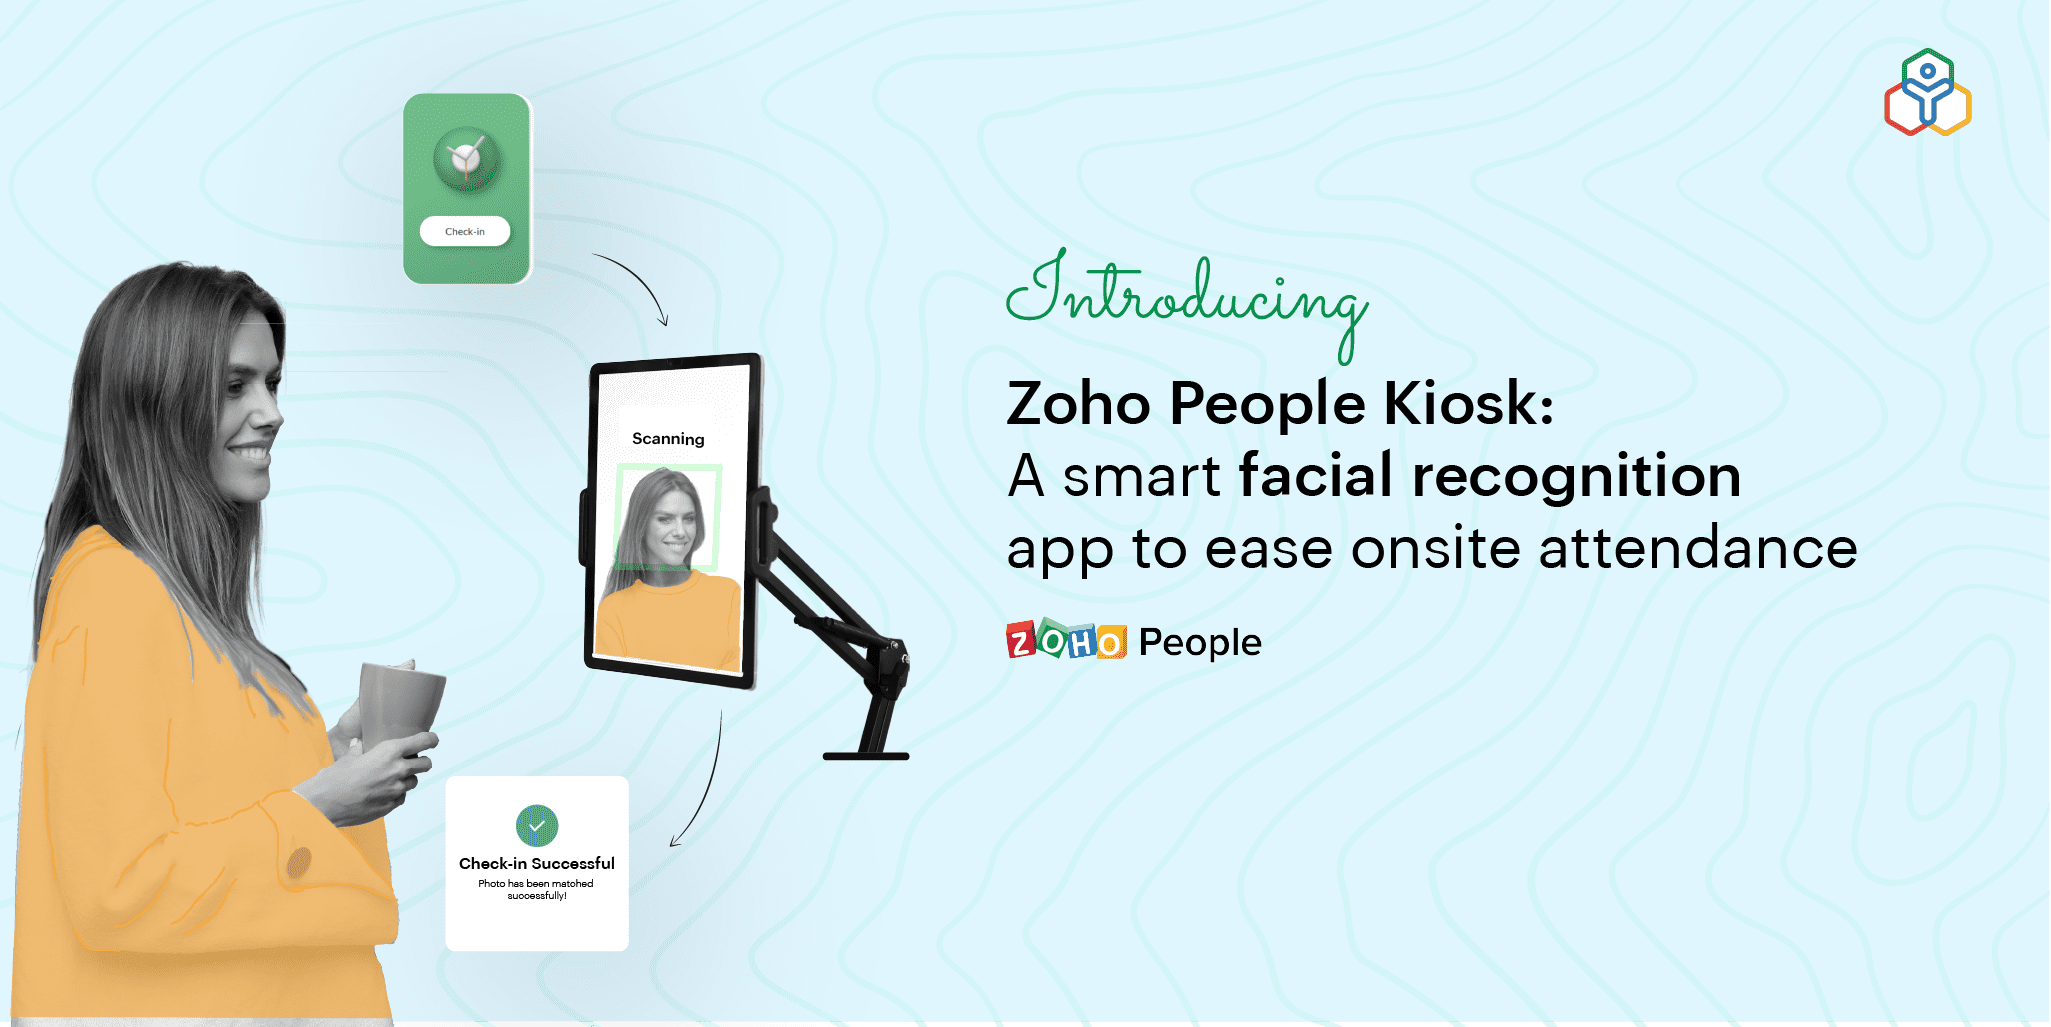 Introducing Zoho People Kiosk: Clock in and out in seconds with facial recognition